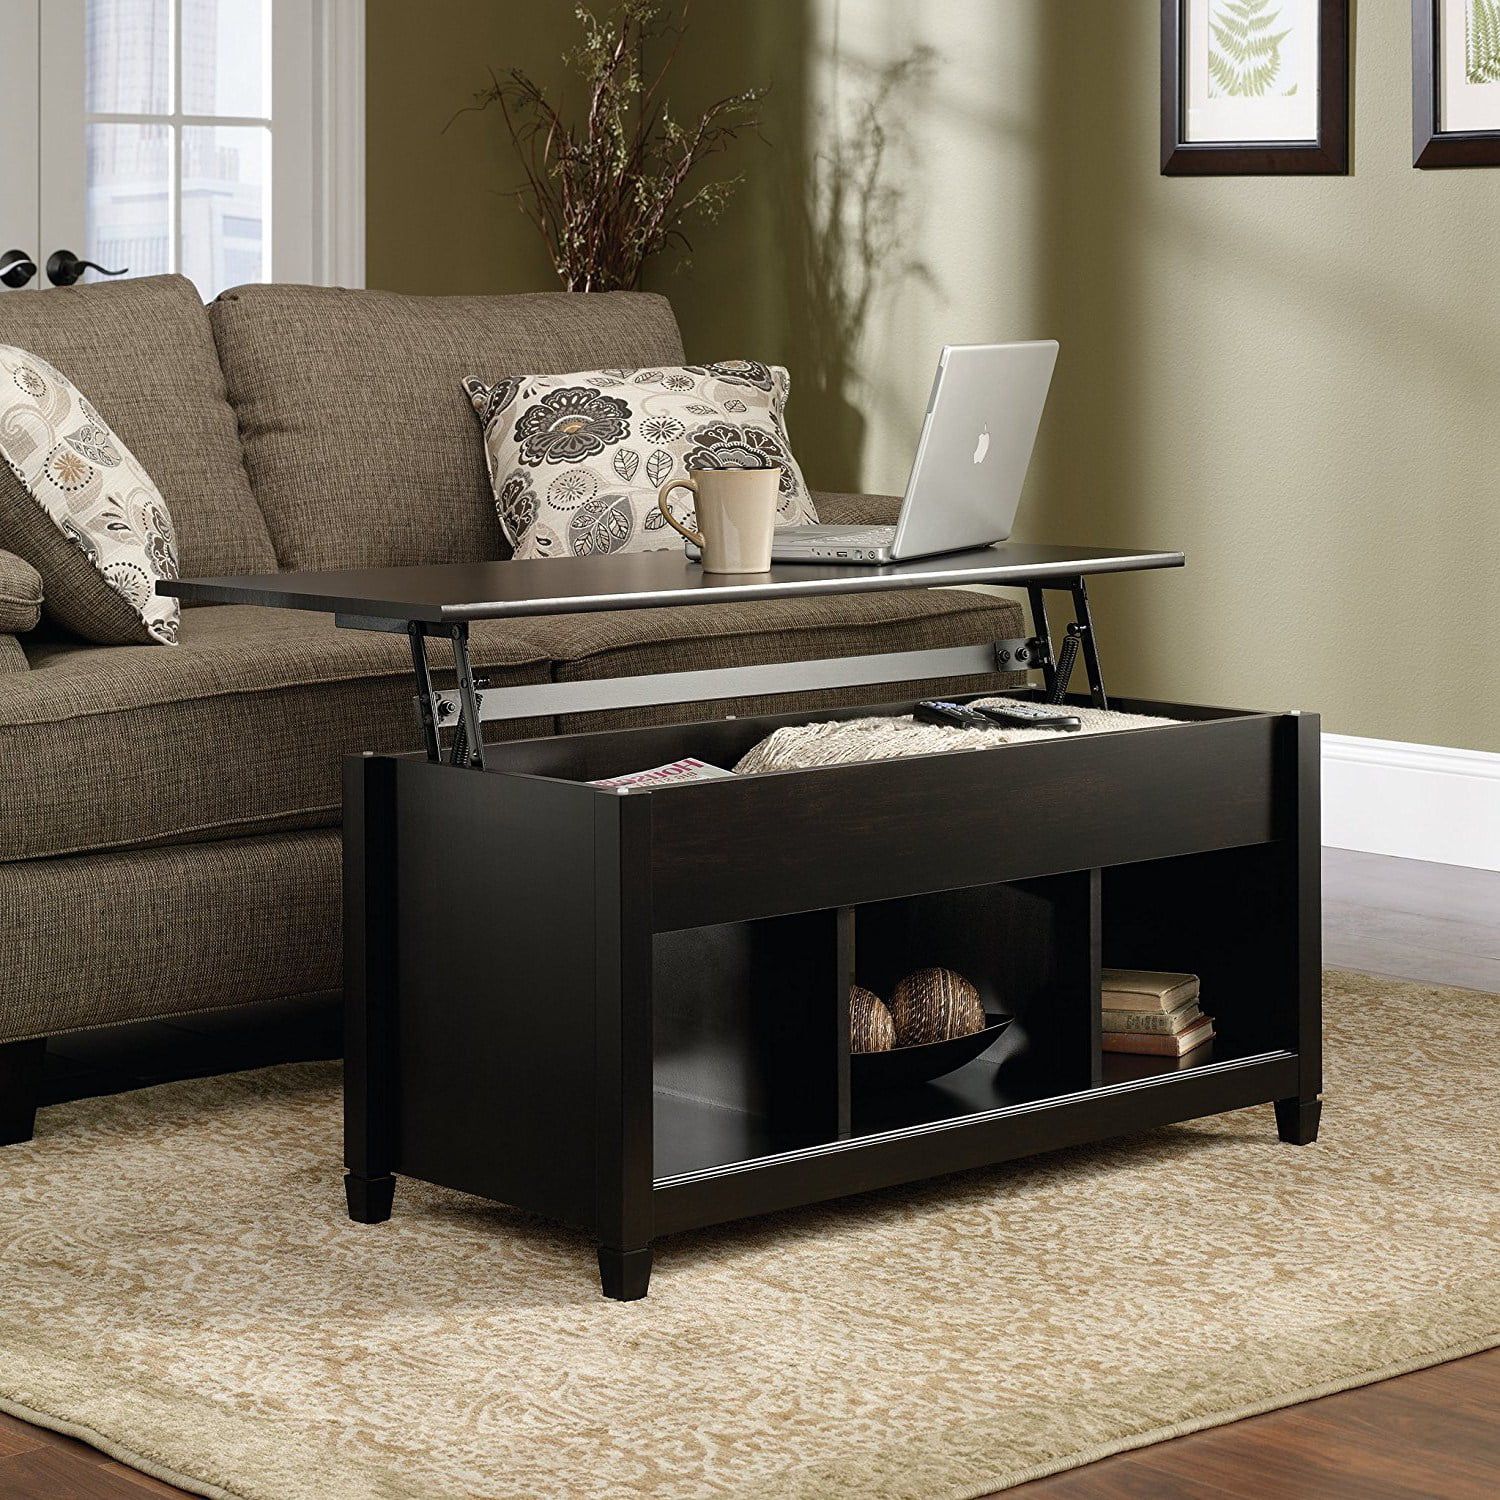 Zimtown Lift Up Top Coffee Table With Hidden Compartment End Rectangle Throughout Lift Top Coffee Tables With Storage (View 7 of 15)